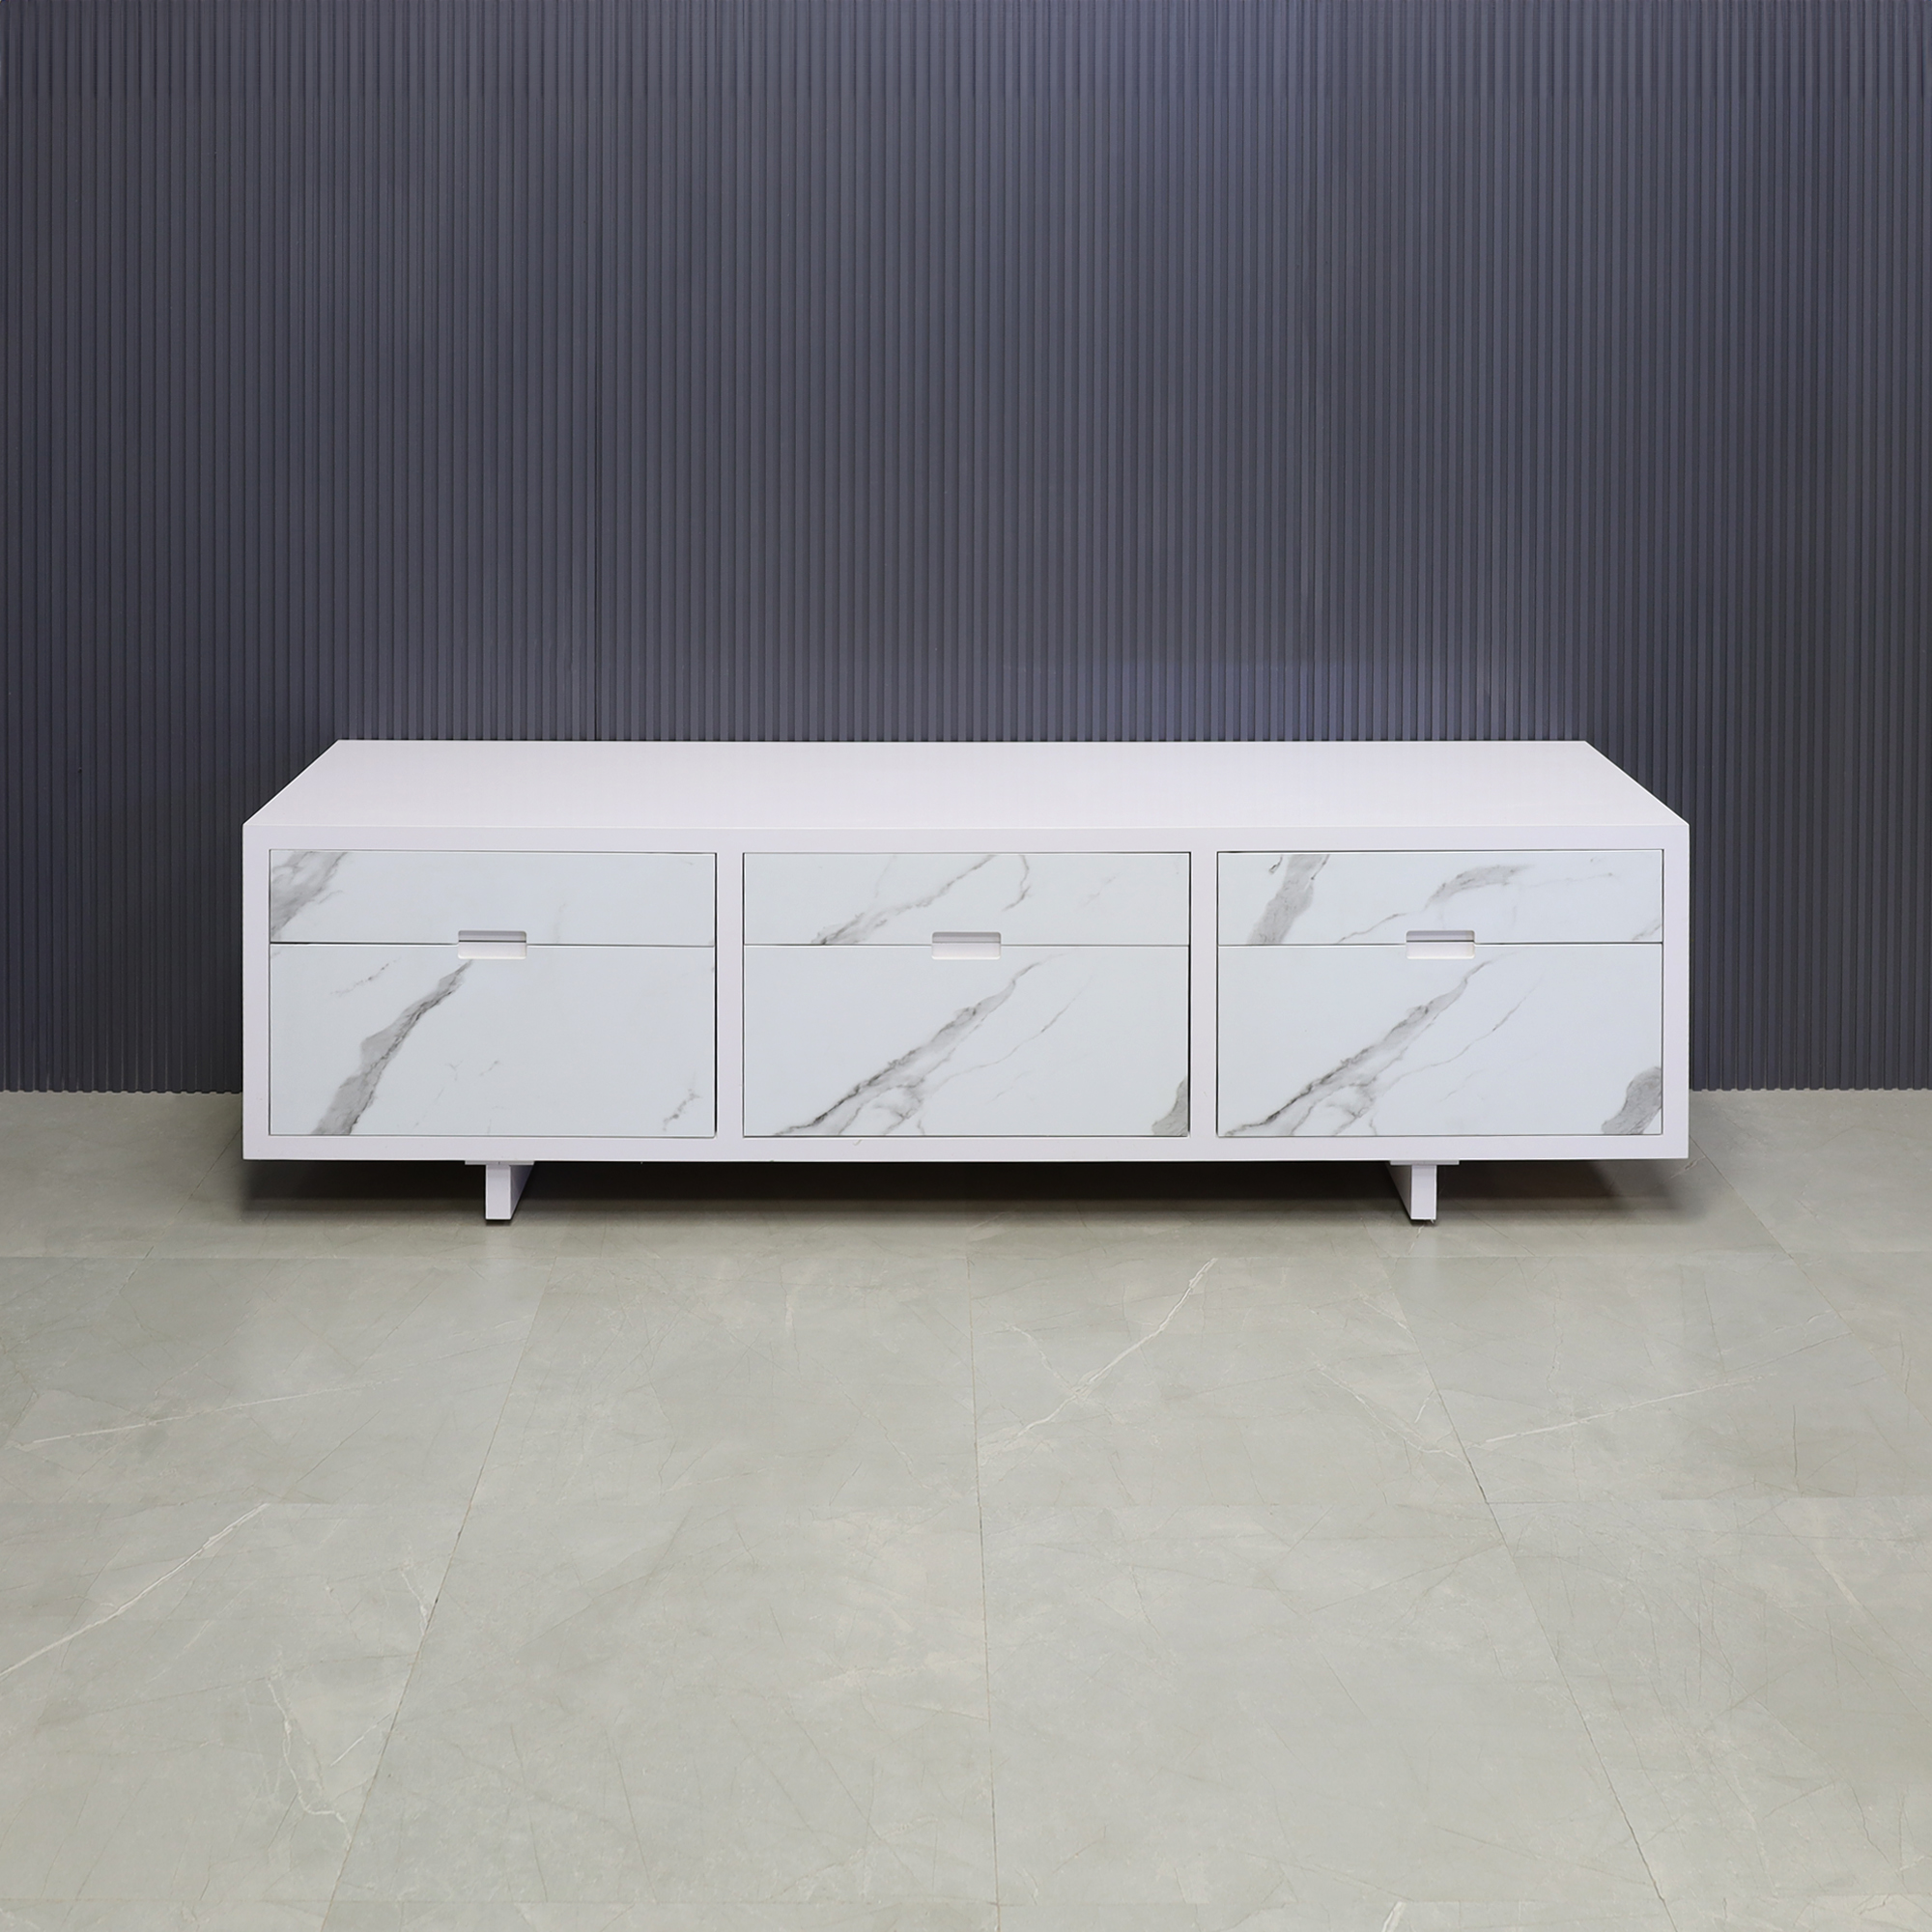 84 inches Seattle Storage Credenza in white gloss laminate finish credenza and calcutta stone pvc finish front drawers shown here.